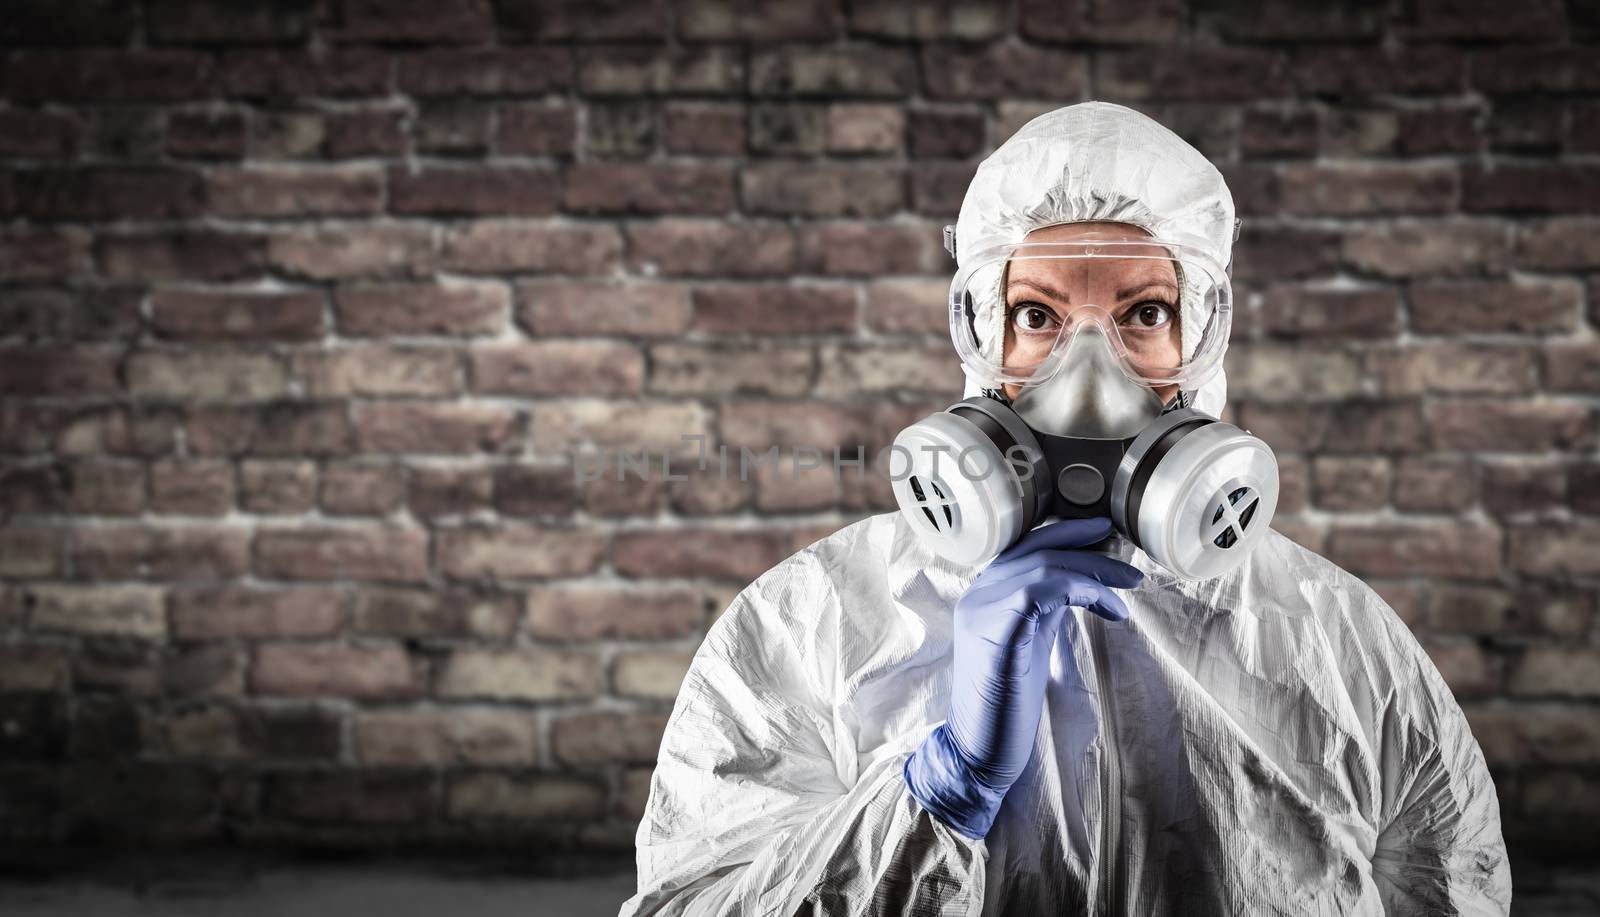 Woman Wearing Hazmat Suit, Protective Gas Mask and Goggles Against Brick Wall. by Feverpitched